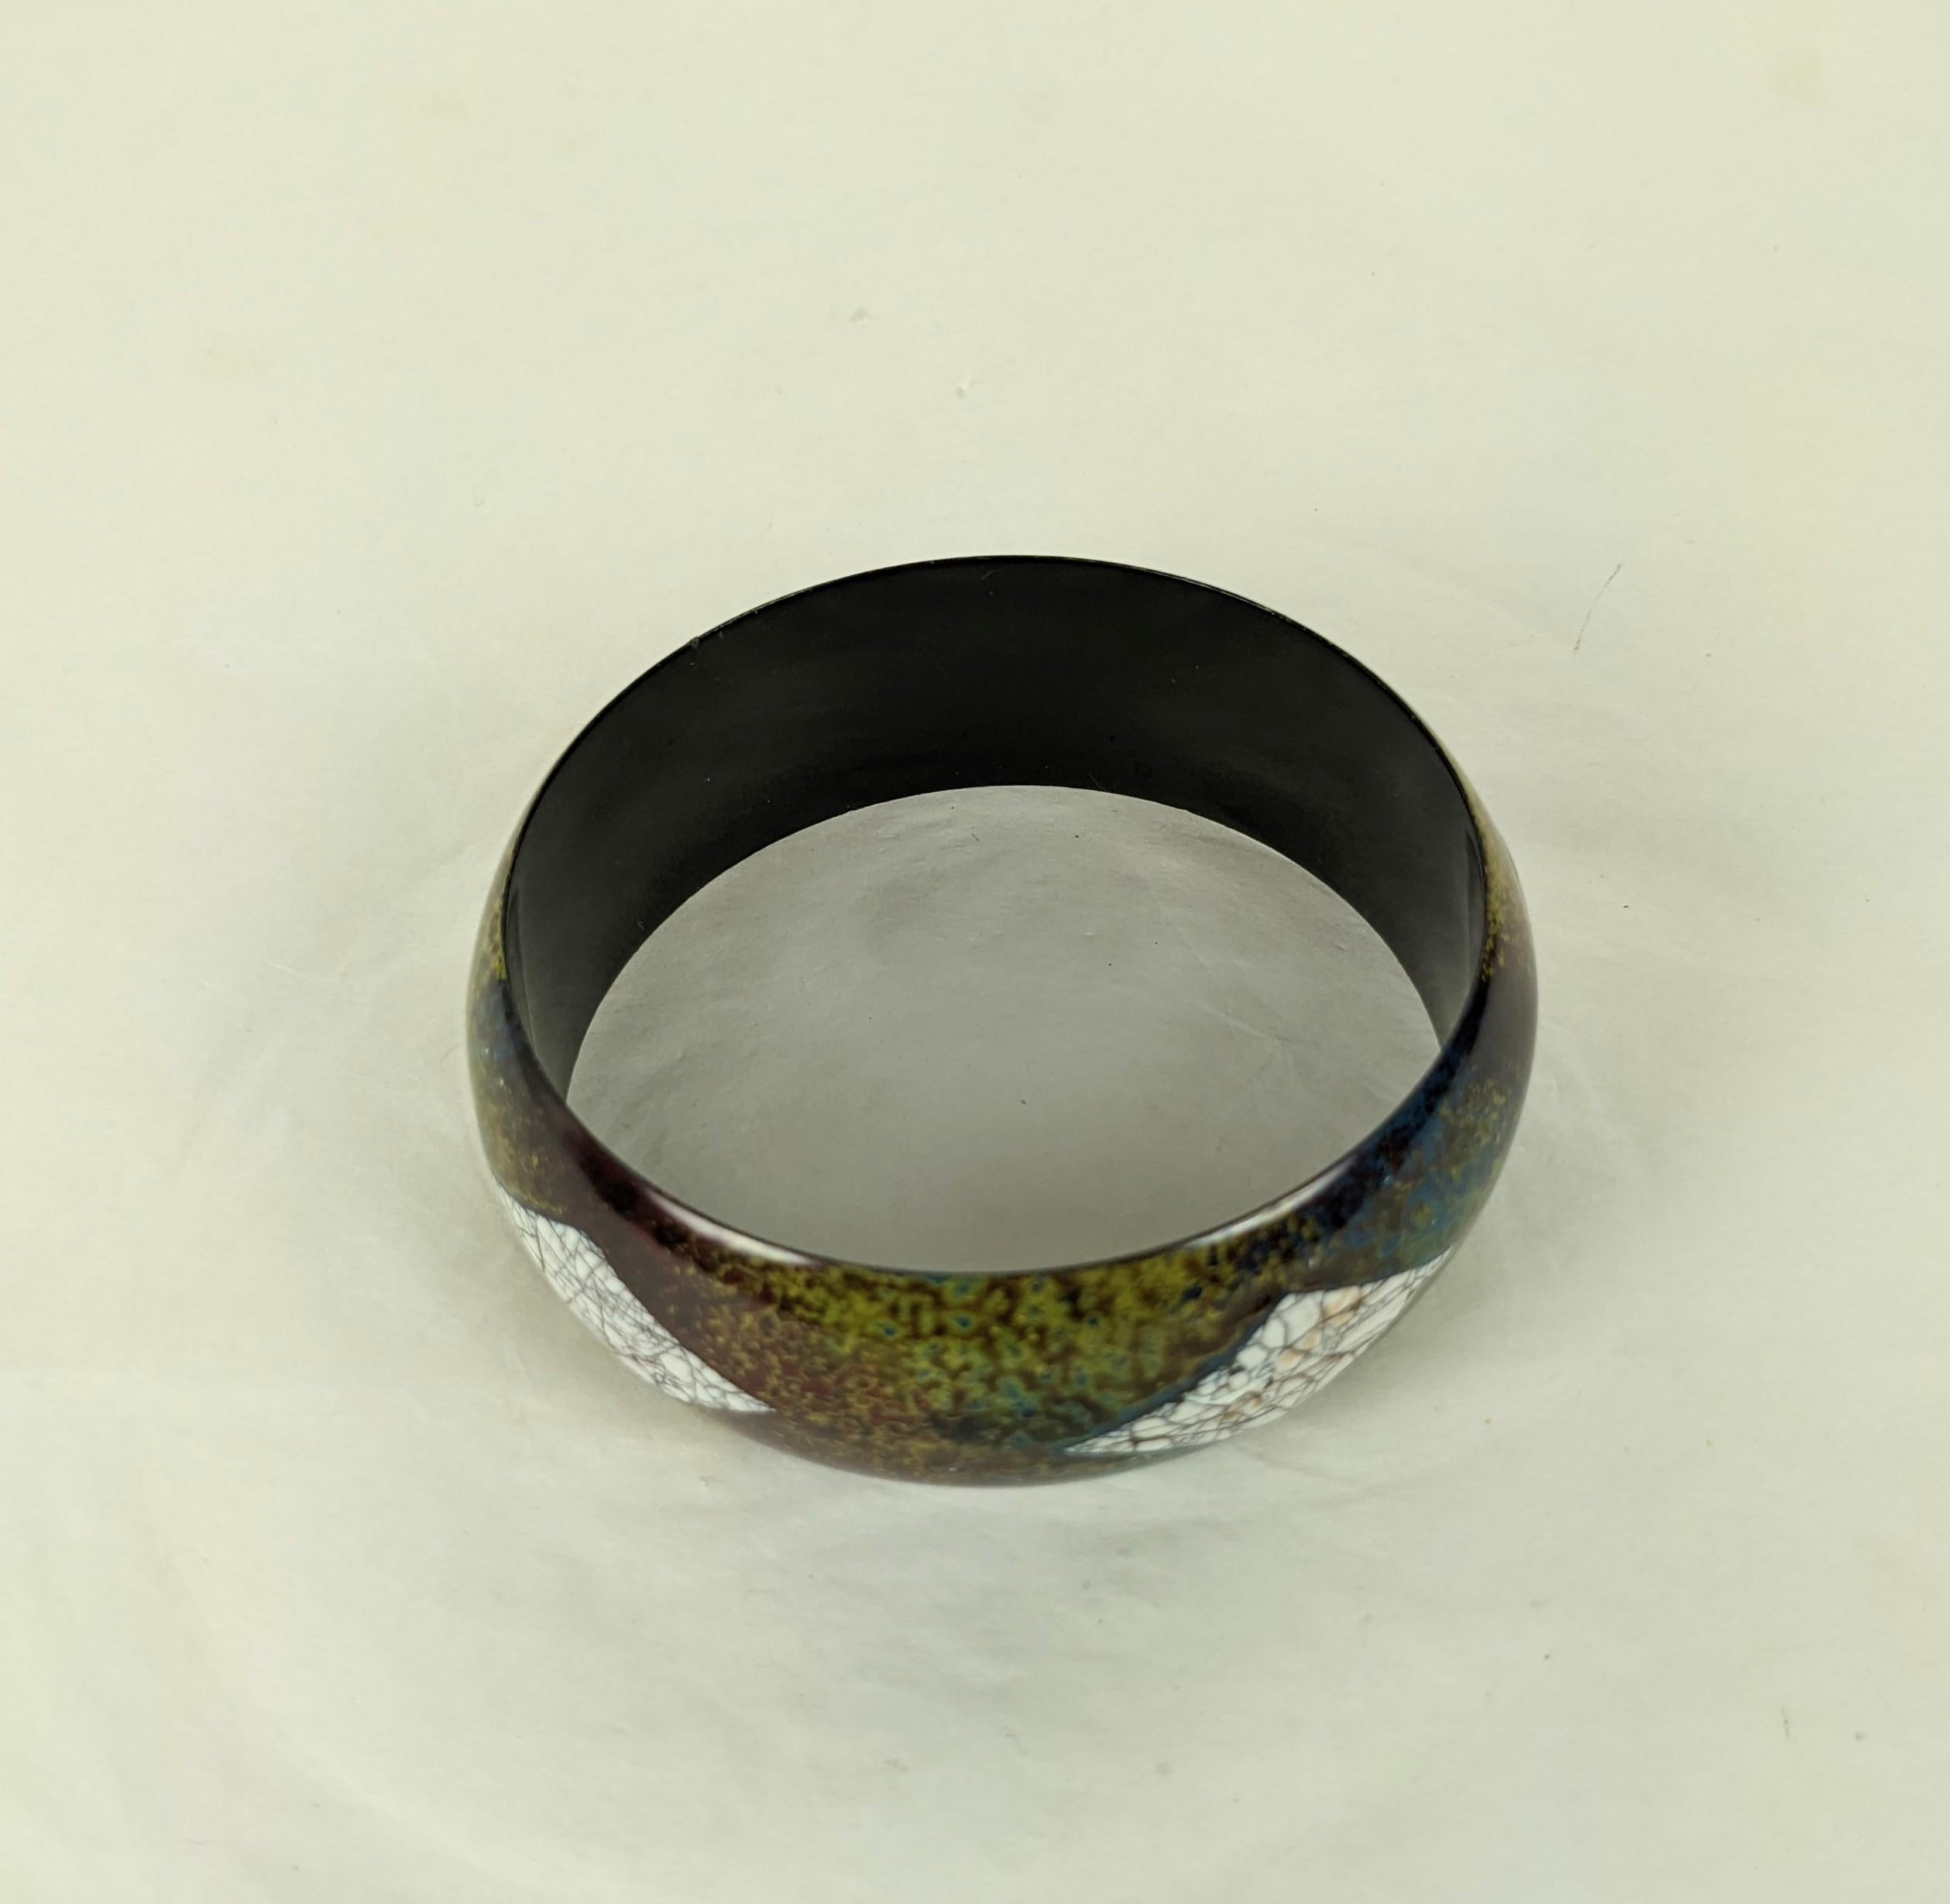 Art Deco Eggshell Lacquer Bangle Bracelet In Excellent Condition For Sale In New York, NY